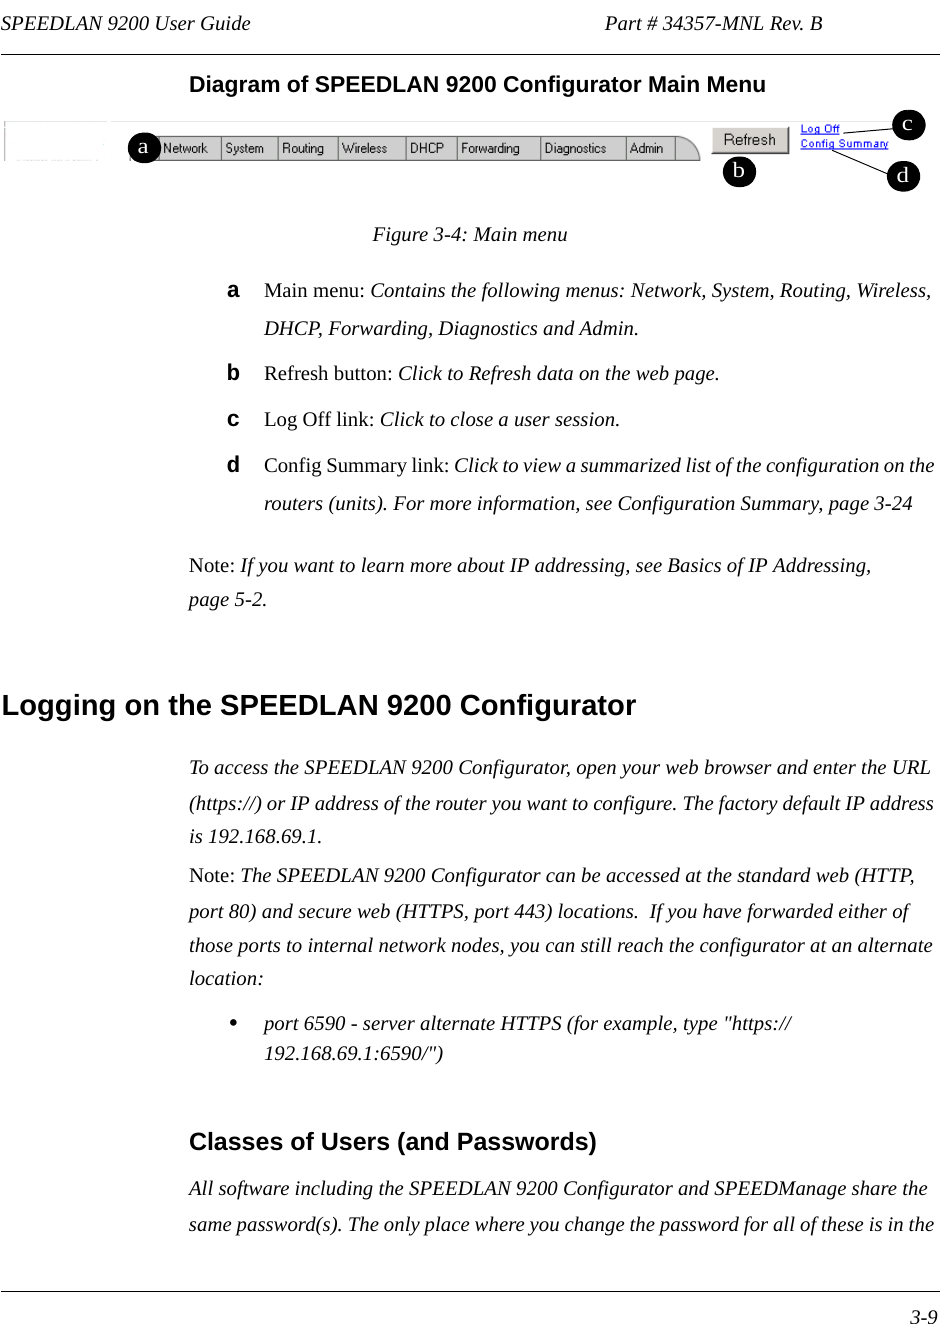 SPEEDLAN 9200 User Guide                                                                    Part # 34357-MNL Rev. B      3-9                                                                                                                                                              Diagram of SPEEDLAN 9200 Configurator Main MenuFigure 3-4: Main menua   Main menu: Contains the following menus: Network, System, Routing, Wireless, DHCP, Forwarding, Diagnostics and Admin.bRefresh button: Click to Refresh data on the web page.cLog Off link: Click to close a user session.dConfig Summary link: Click to view a summarized list of the configuration on the routers (units). For more information, see Configuration Summary, page 3-24Note: If you want to learn more about IP addressing, see Basics of IP Addressing, page 5-2.Logging on the SPEEDLAN 9200 ConfiguratorTo access the SPEEDLAN 9200 Configurator, open your web browser and enter the URL (https://) or IP address of the router you want to configure. The factory default IP address is 192.168.69.1. Note: The SPEEDLAN 9200 Configurator can be accessed at the standard web (HTTP, port 80) and secure web (HTTPS, port 443) locations.  If you have forwarded either of those ports to internal network nodes, you can still reach the configurator at an alternate location: •port 6590 - server alternate HTTPS (for example, type &quot;https://192.168.69.1:6590/&quot;)Classes of Users (and Passwords)All software including the SPEEDLAN 9200 Configurator and SPEEDManage share the same password(s). The only place where you change the password for all of these is in the dabcd